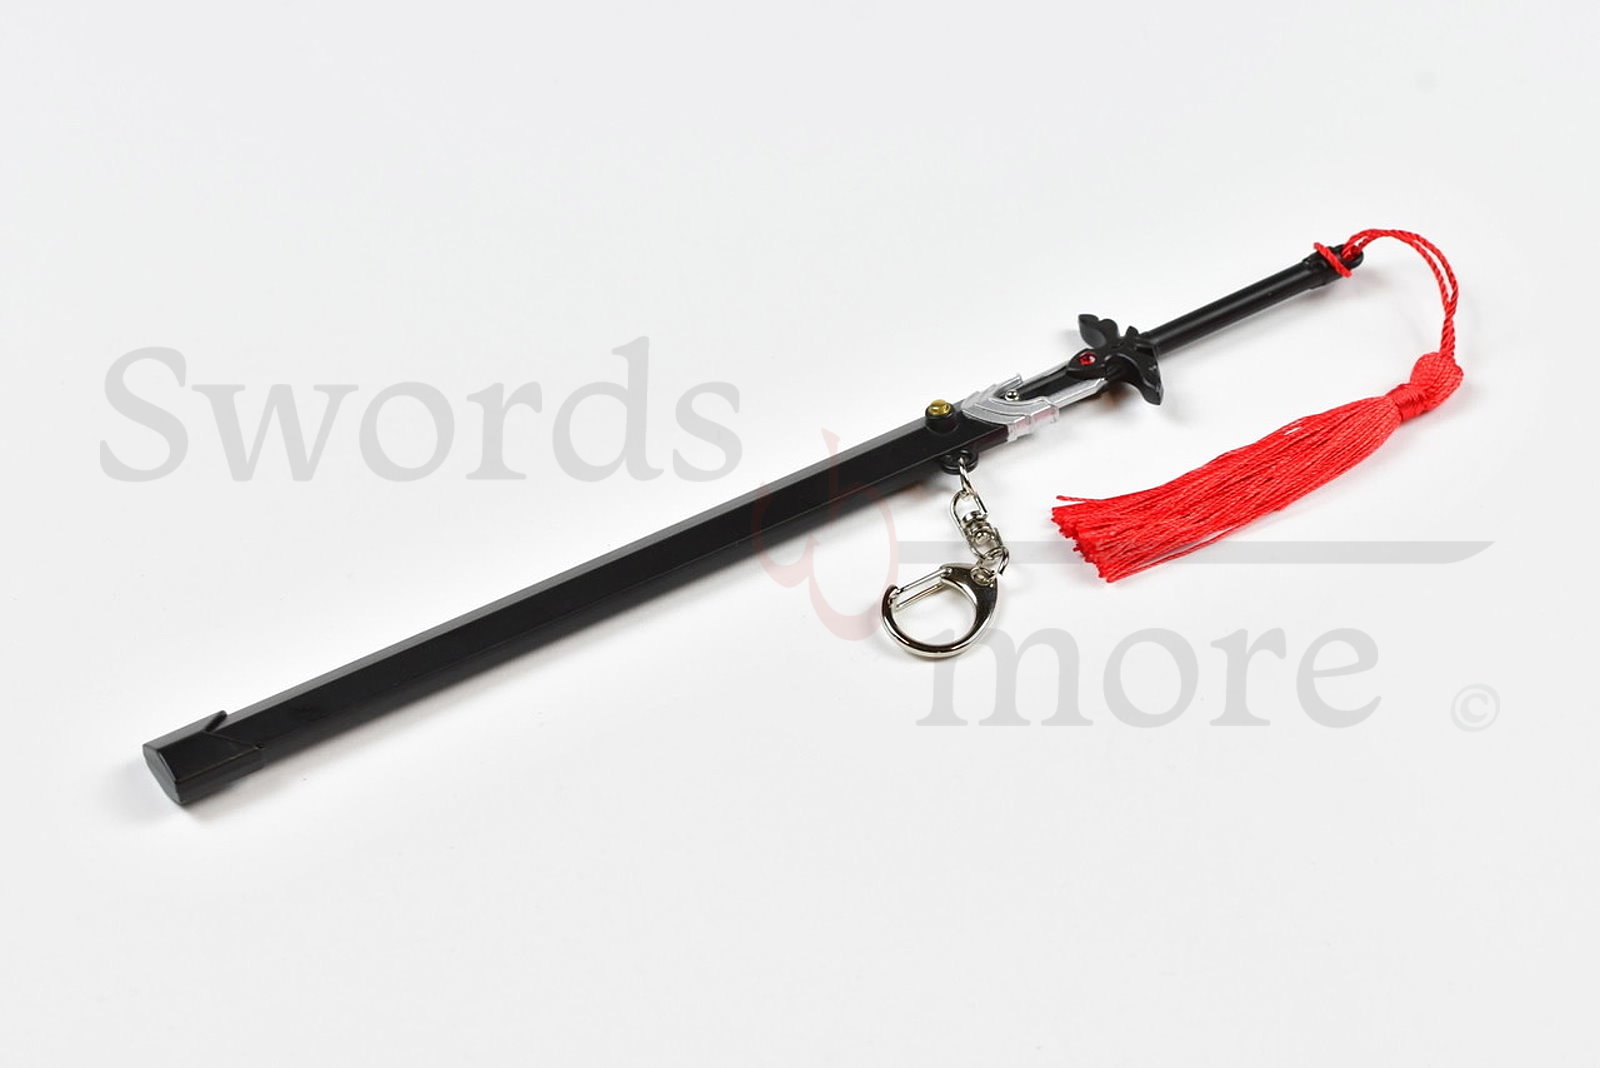 Sword Art Online - Kirito Sword Night Sky, sword letter opener with scabbard and stand 